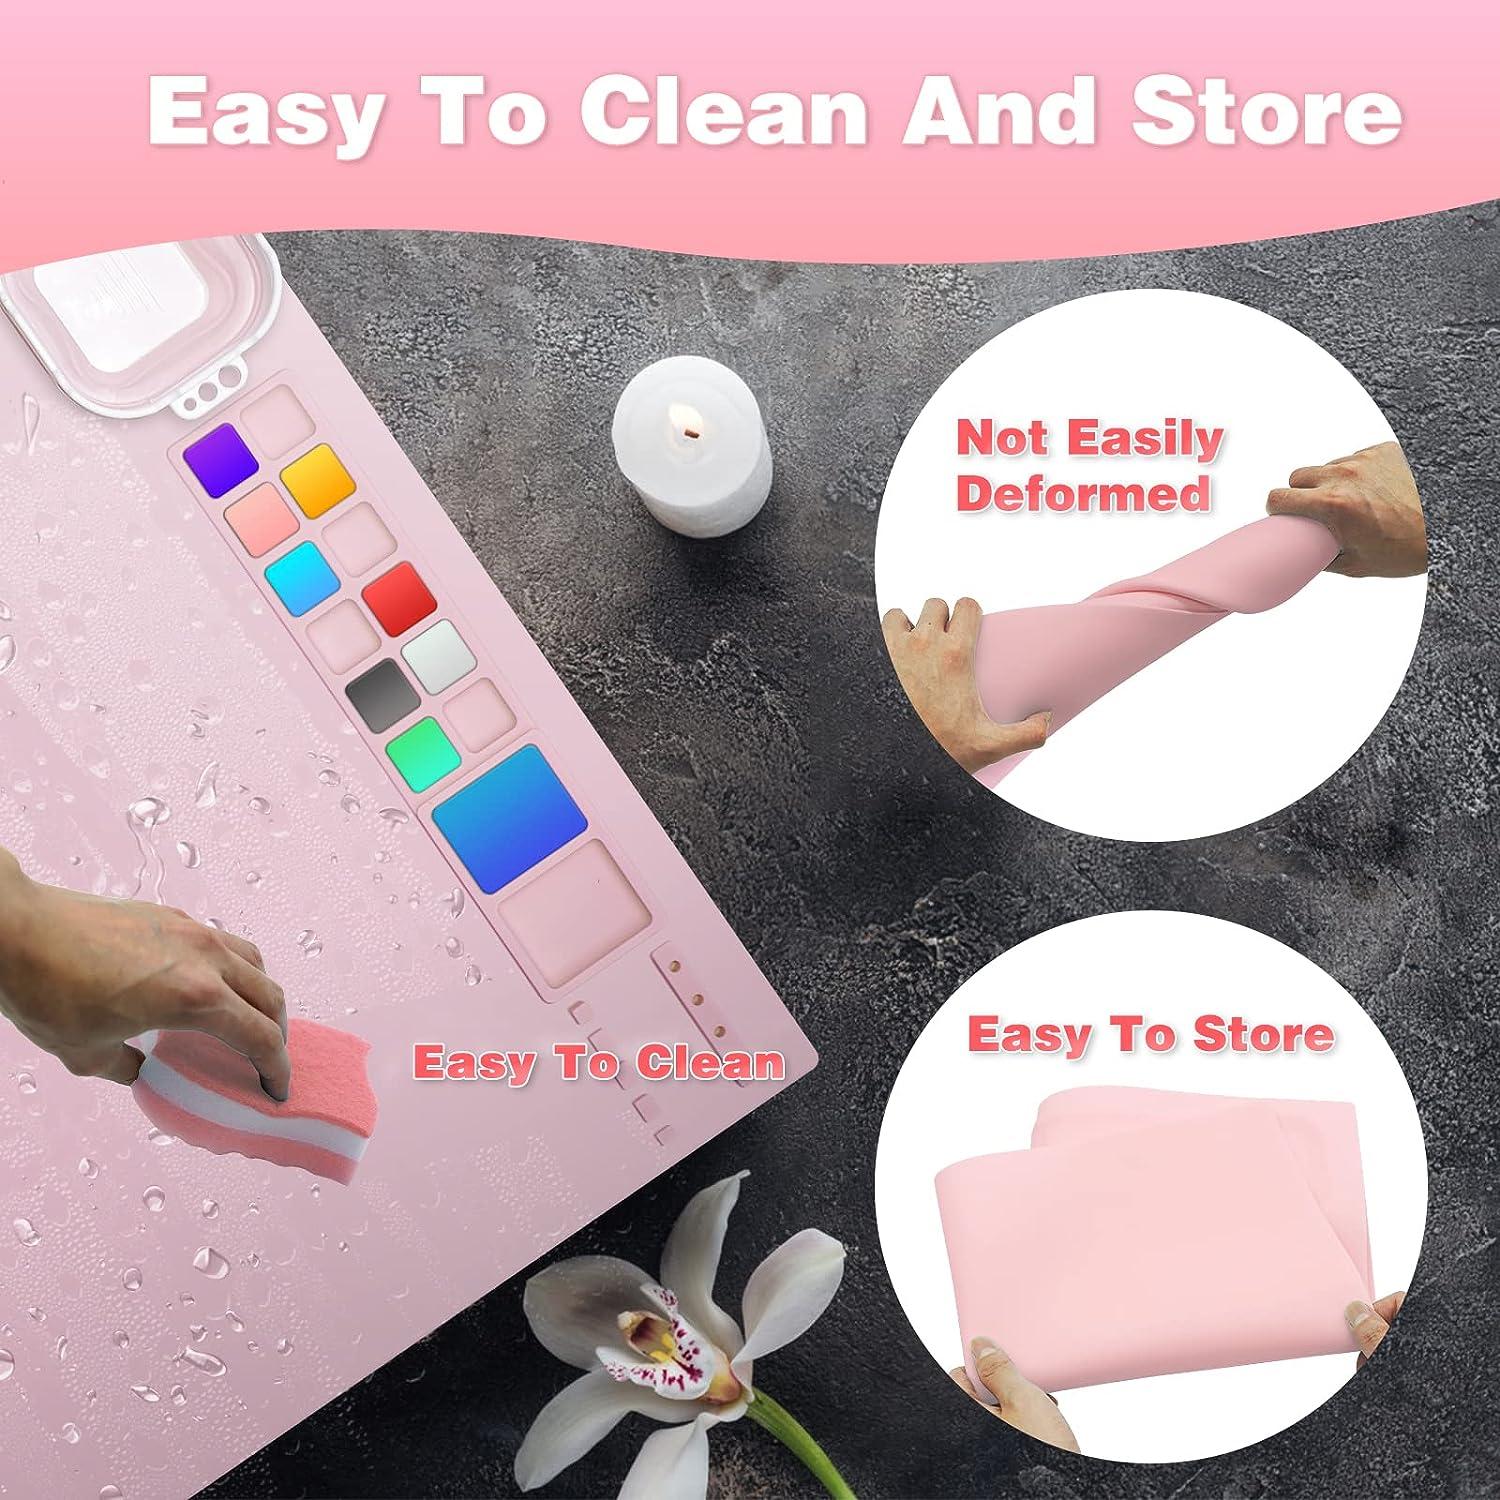 Silicone Craft Mat, Nonstick Silicone Painting Mat 16x 20 Large Silicone Craft Sheet with Cleaning Cup and Paint Holder, Multipurpose Silicone Art